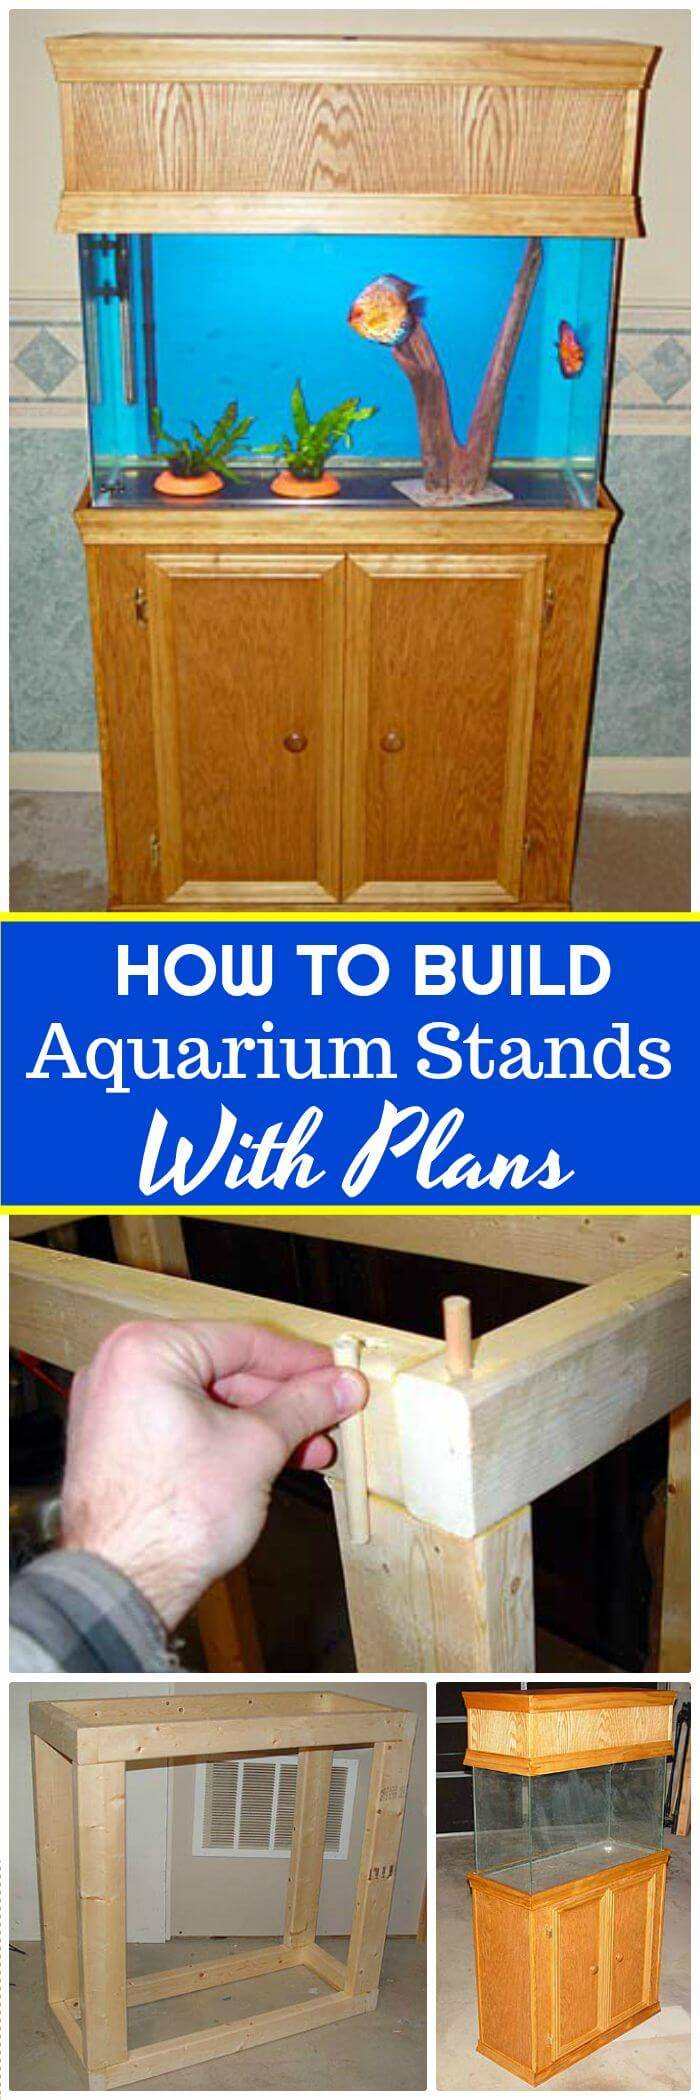 DIY Aquarium Stands With Small Plans, low-cost diy aquarium stand ideas with step-by-step instructions